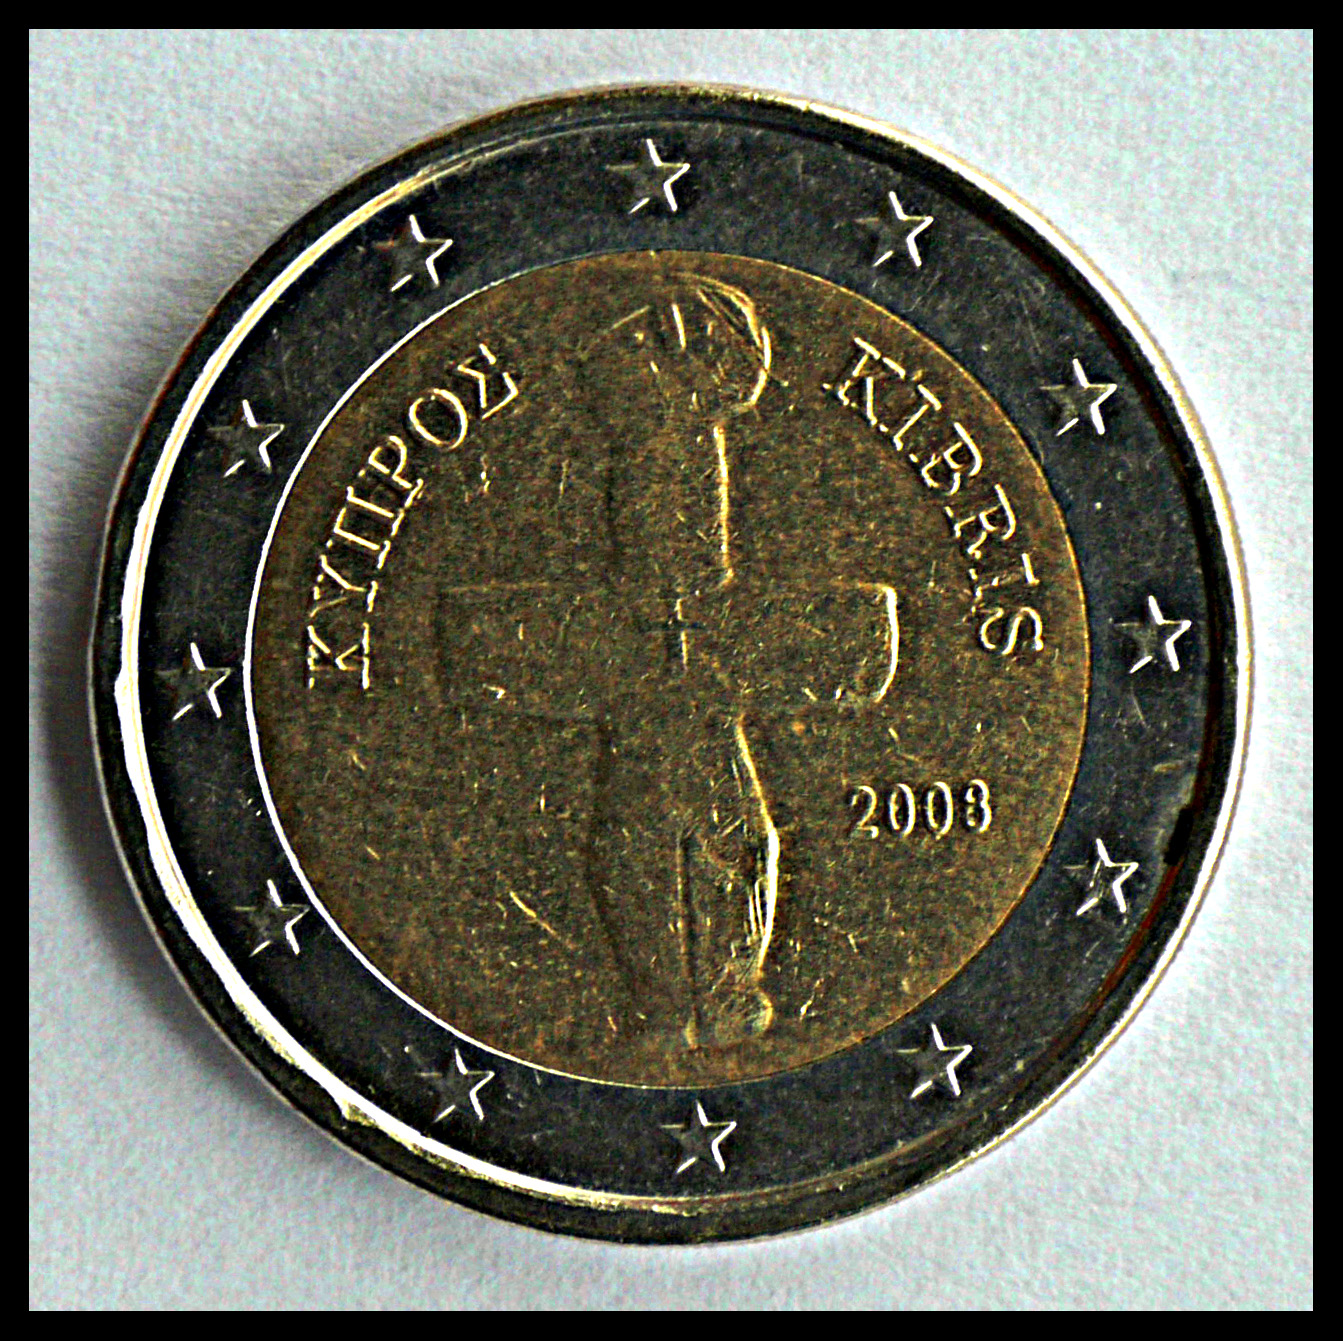 a close up view of a two euro coin